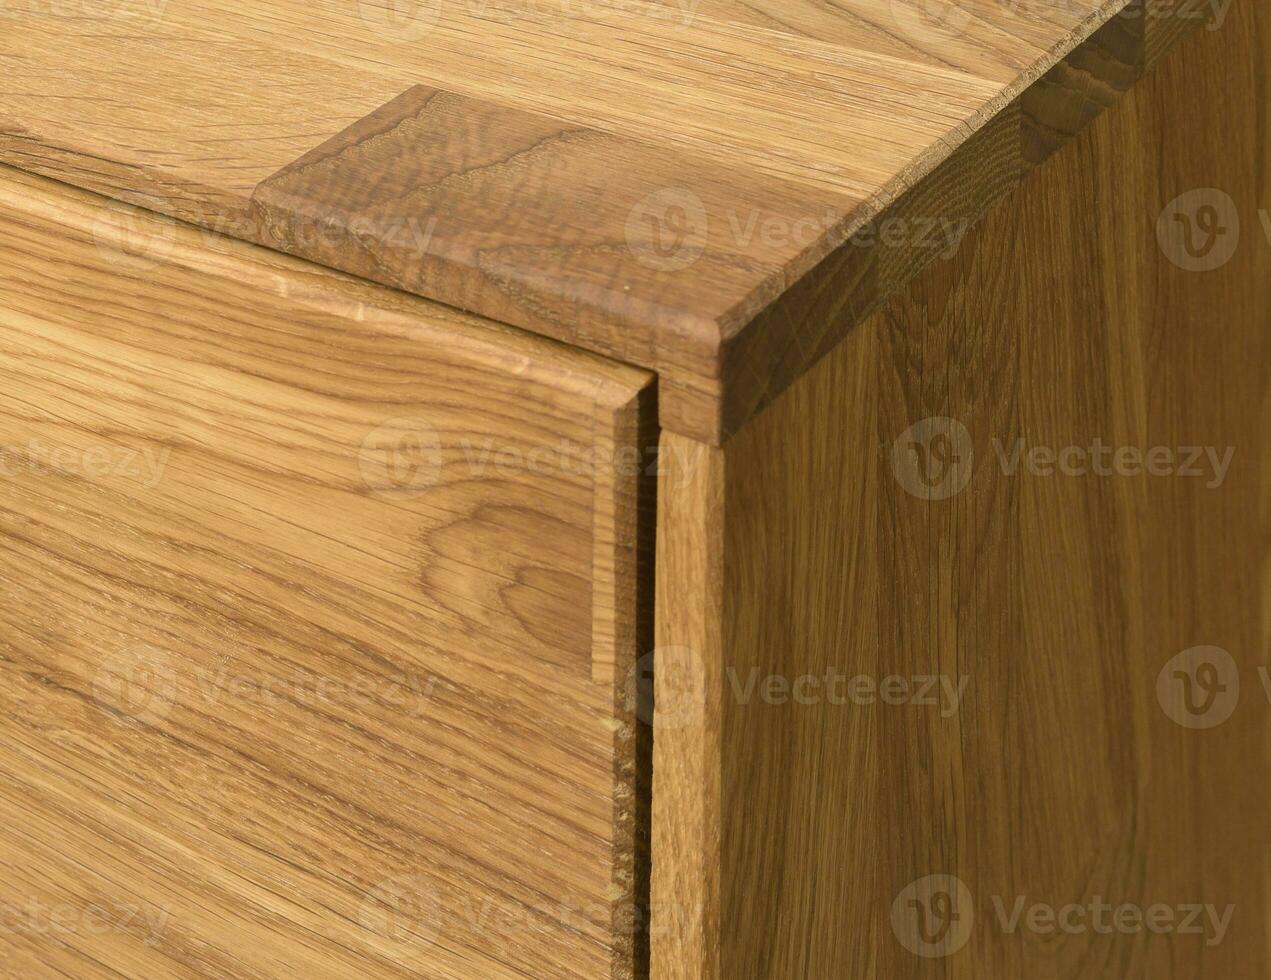 Wooden drawer close view photo, wooden eco furniture elements background. Solid wood furniture details photo